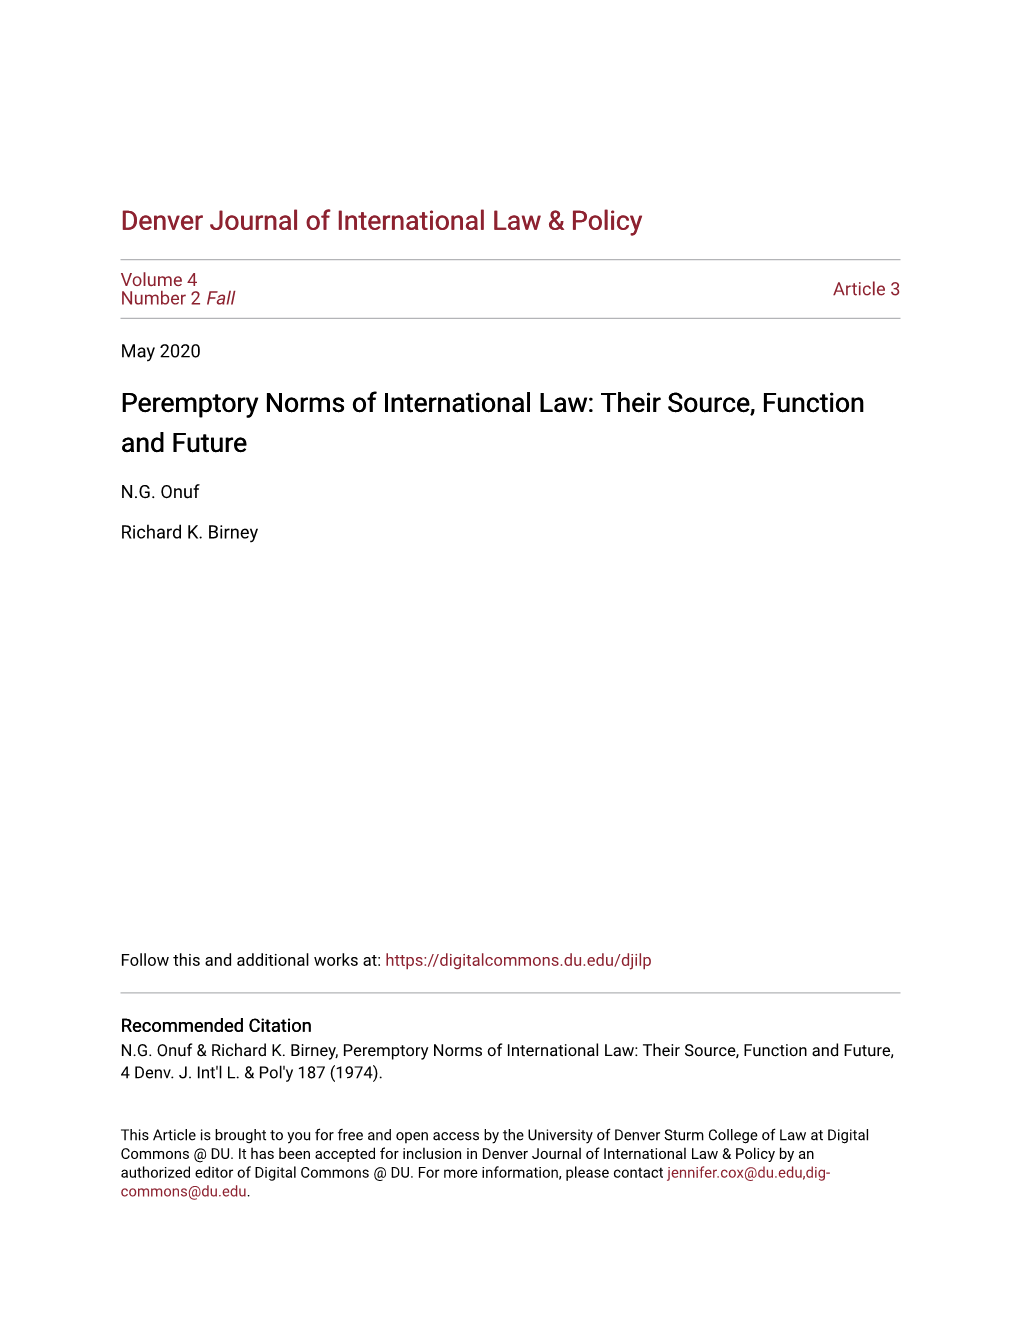 Peremptory Norms of International Law: Their Source, Function and Future